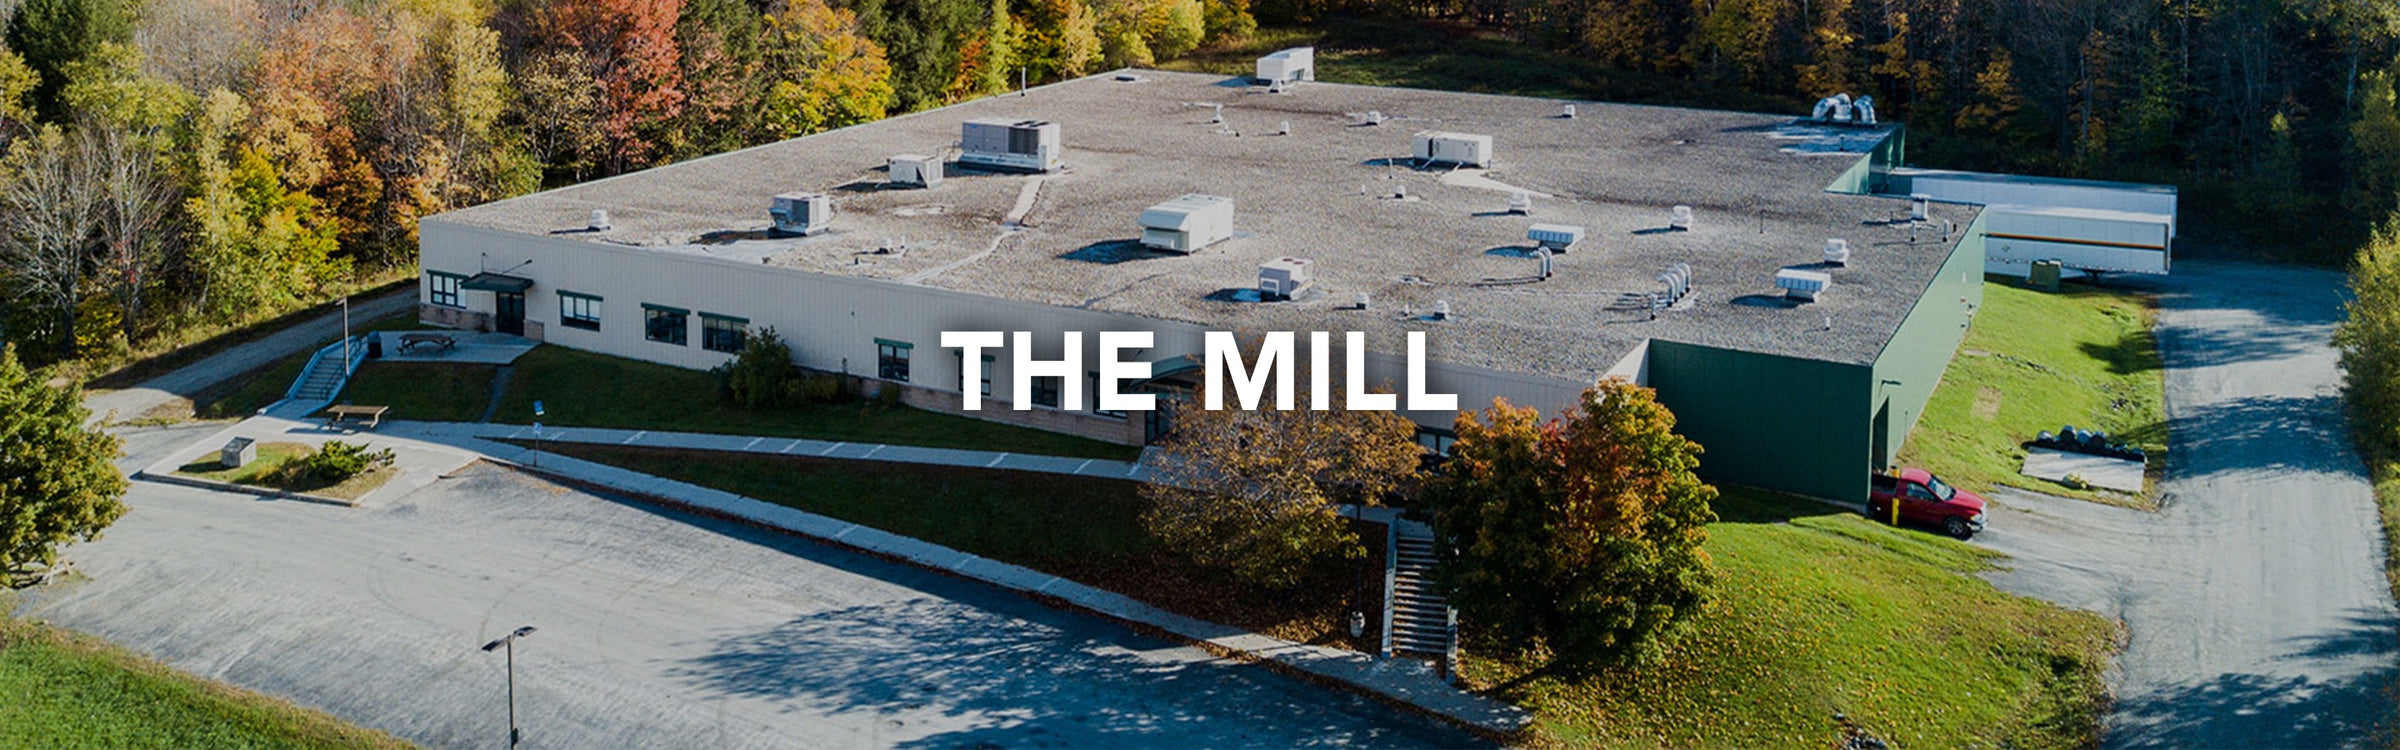 The Mill - an overhead view of the Darn Tough Mill at Northfield, Vermont